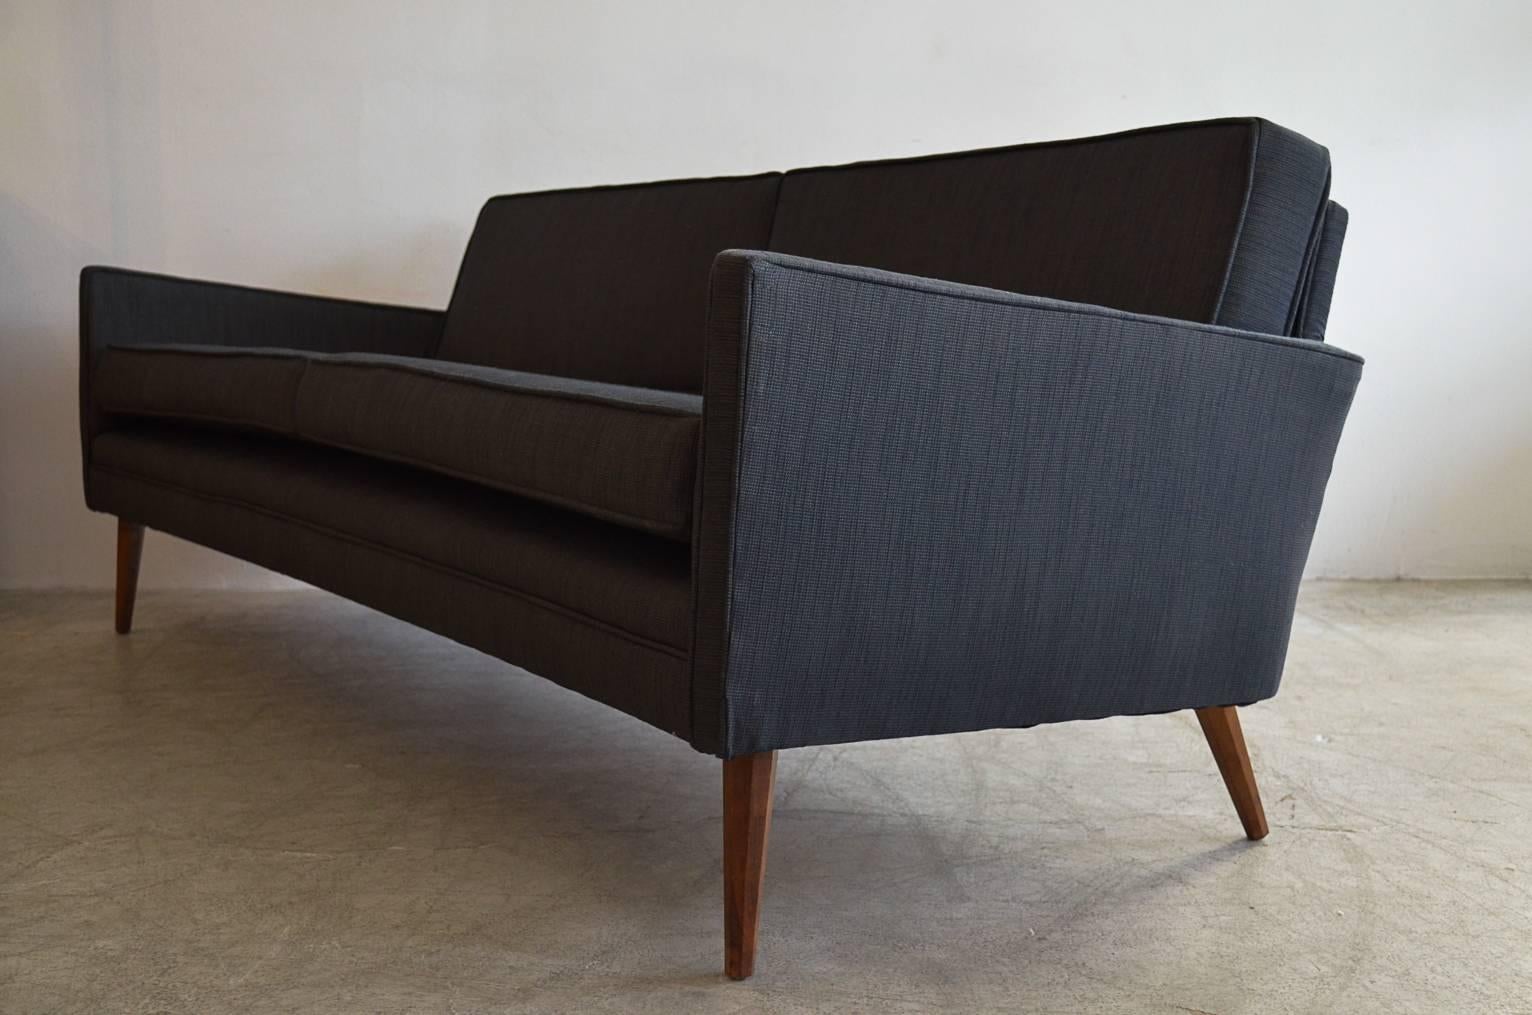 Iconic and rare sofa by Paul McCobb with signature thin angled arms and slight curved back. Beautiful black tweed fabric and walnut legs.

Measures: 80